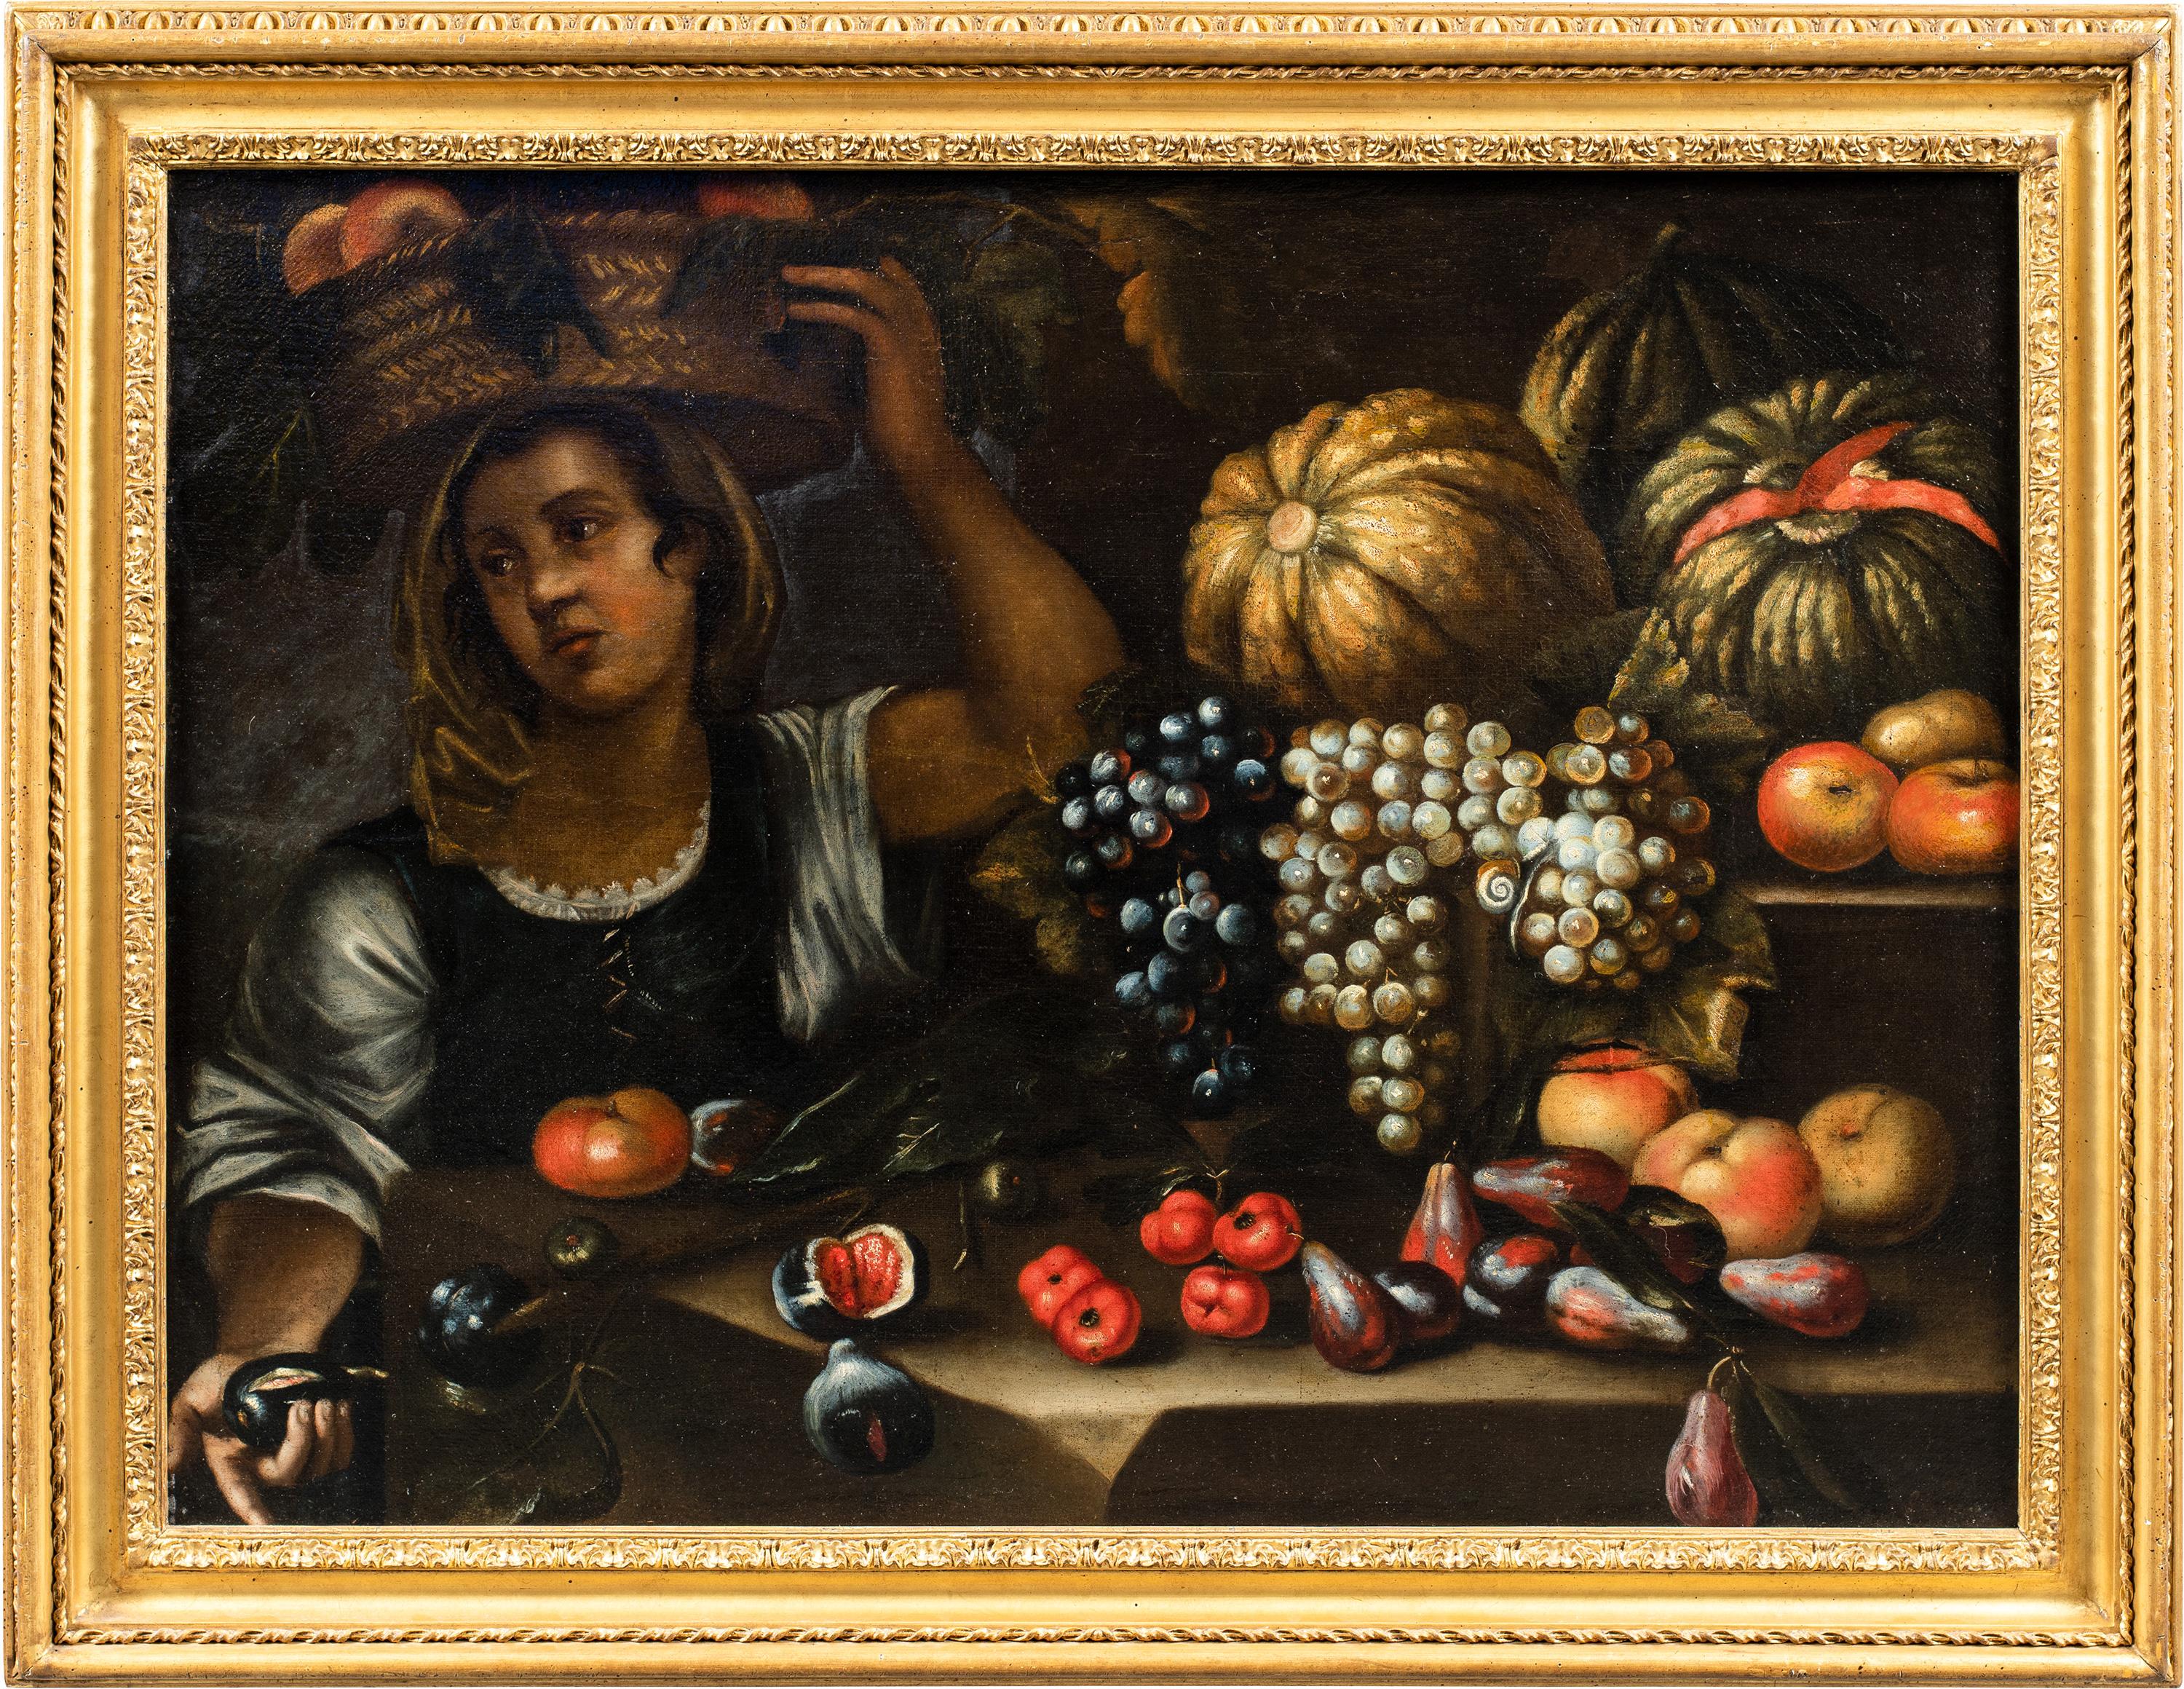 Francesco Annicini (Rome 1632 - post 1679) - Still life with greengrocer.

73.5 x 98.5 cm without frame, 90 x 115 cm with frame.

Antique oil painting on canvas, in a carved and gilded wooden frame.

- The painting can be attributed to the hand of